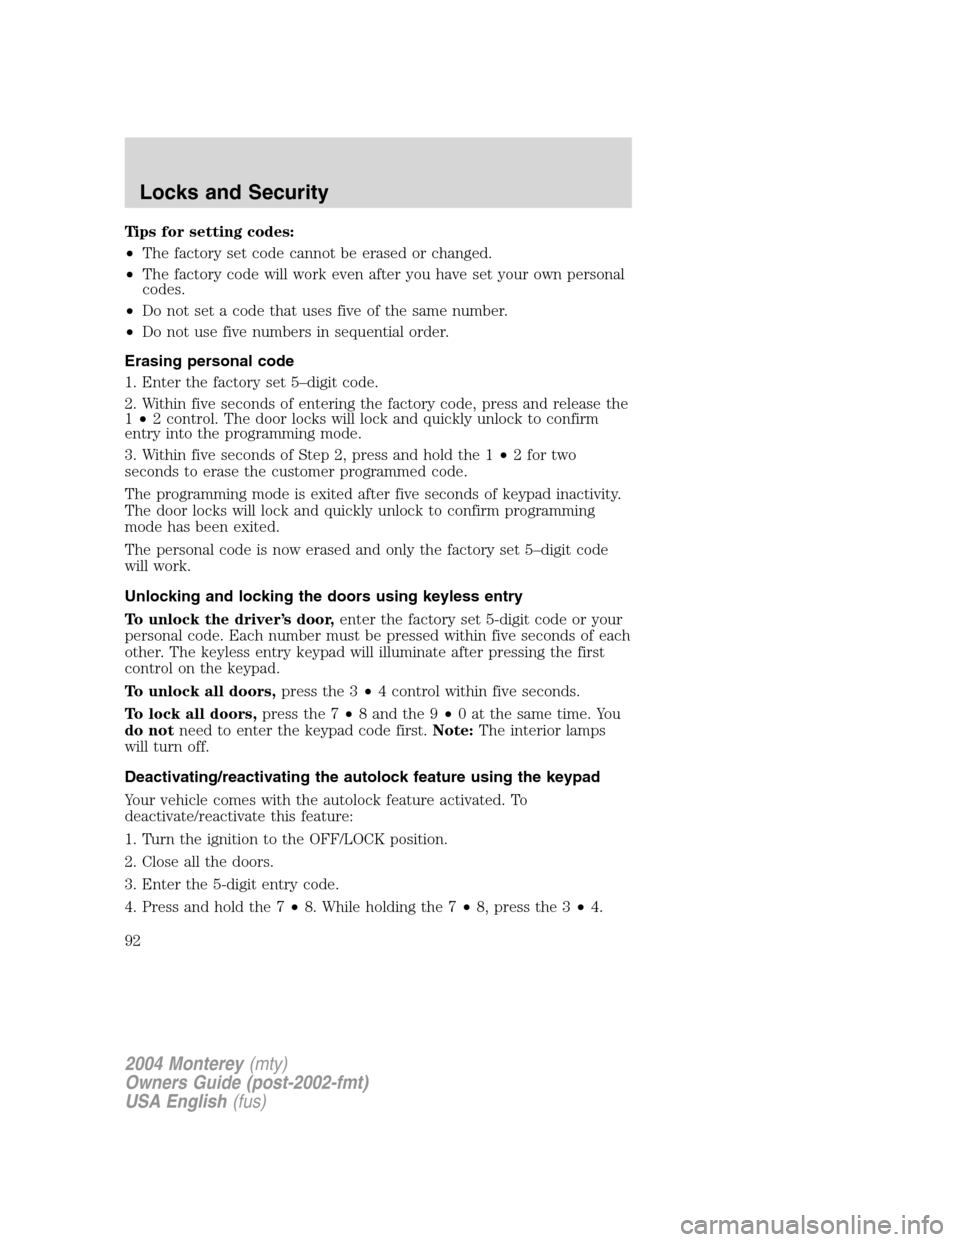 Mercury Monterey 2004  Owners Manuals Tips for setting codes:
•The factory set code cannot be erased or changed.
•The factory code will work even after you have set your own personal
codes.
•Do not set a code that uses five of the s